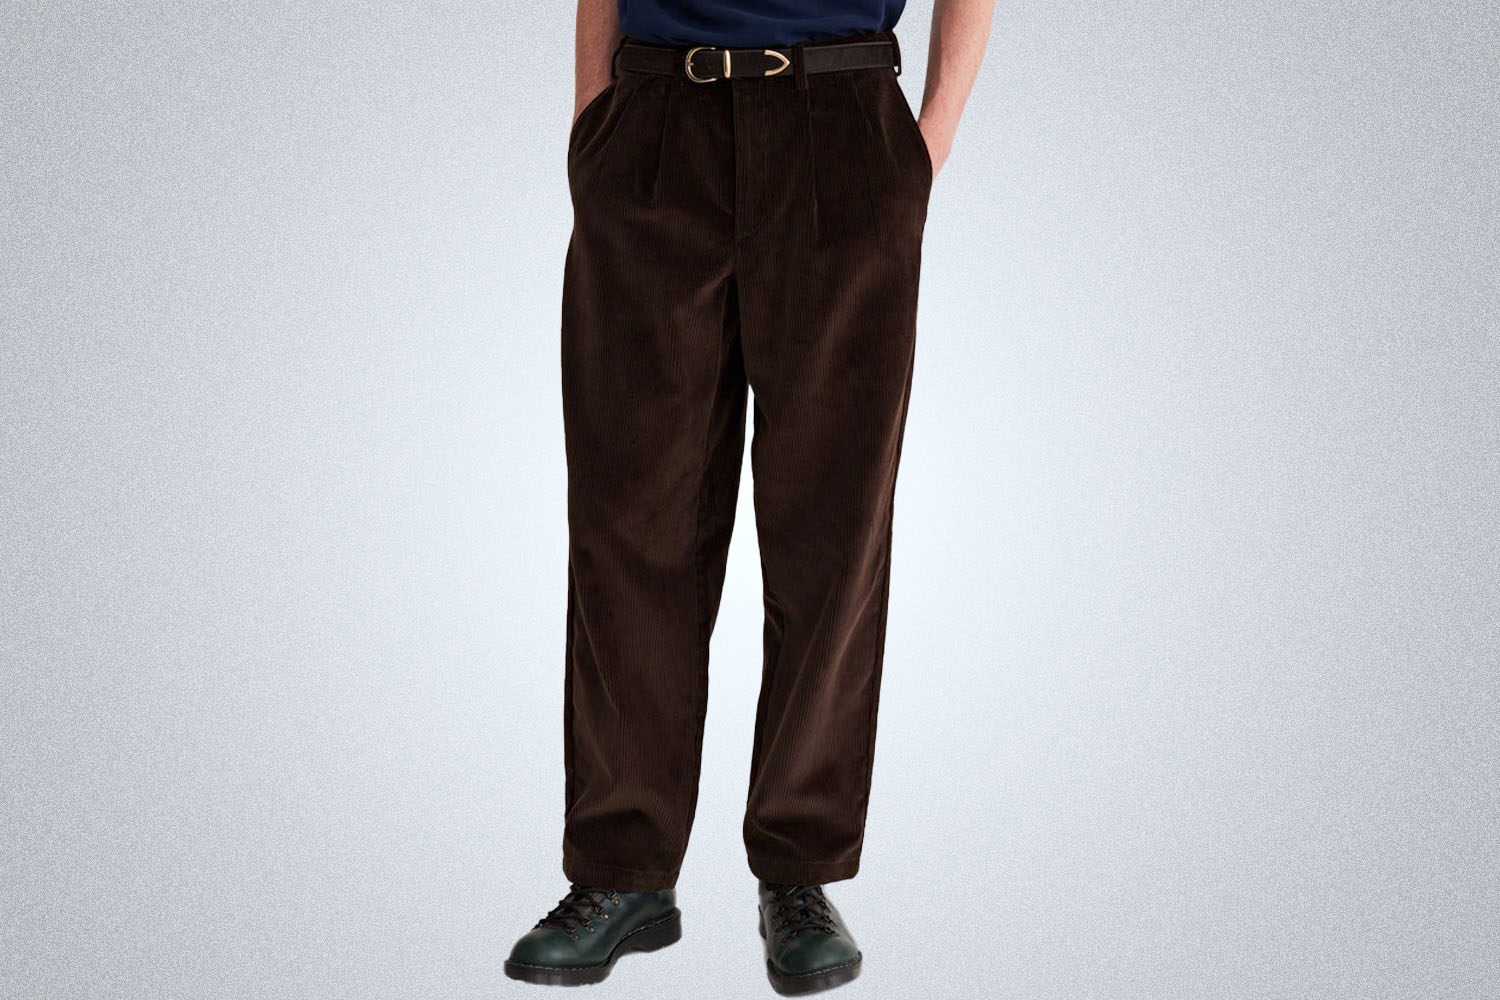 a pair of brown corduroy pants on a model